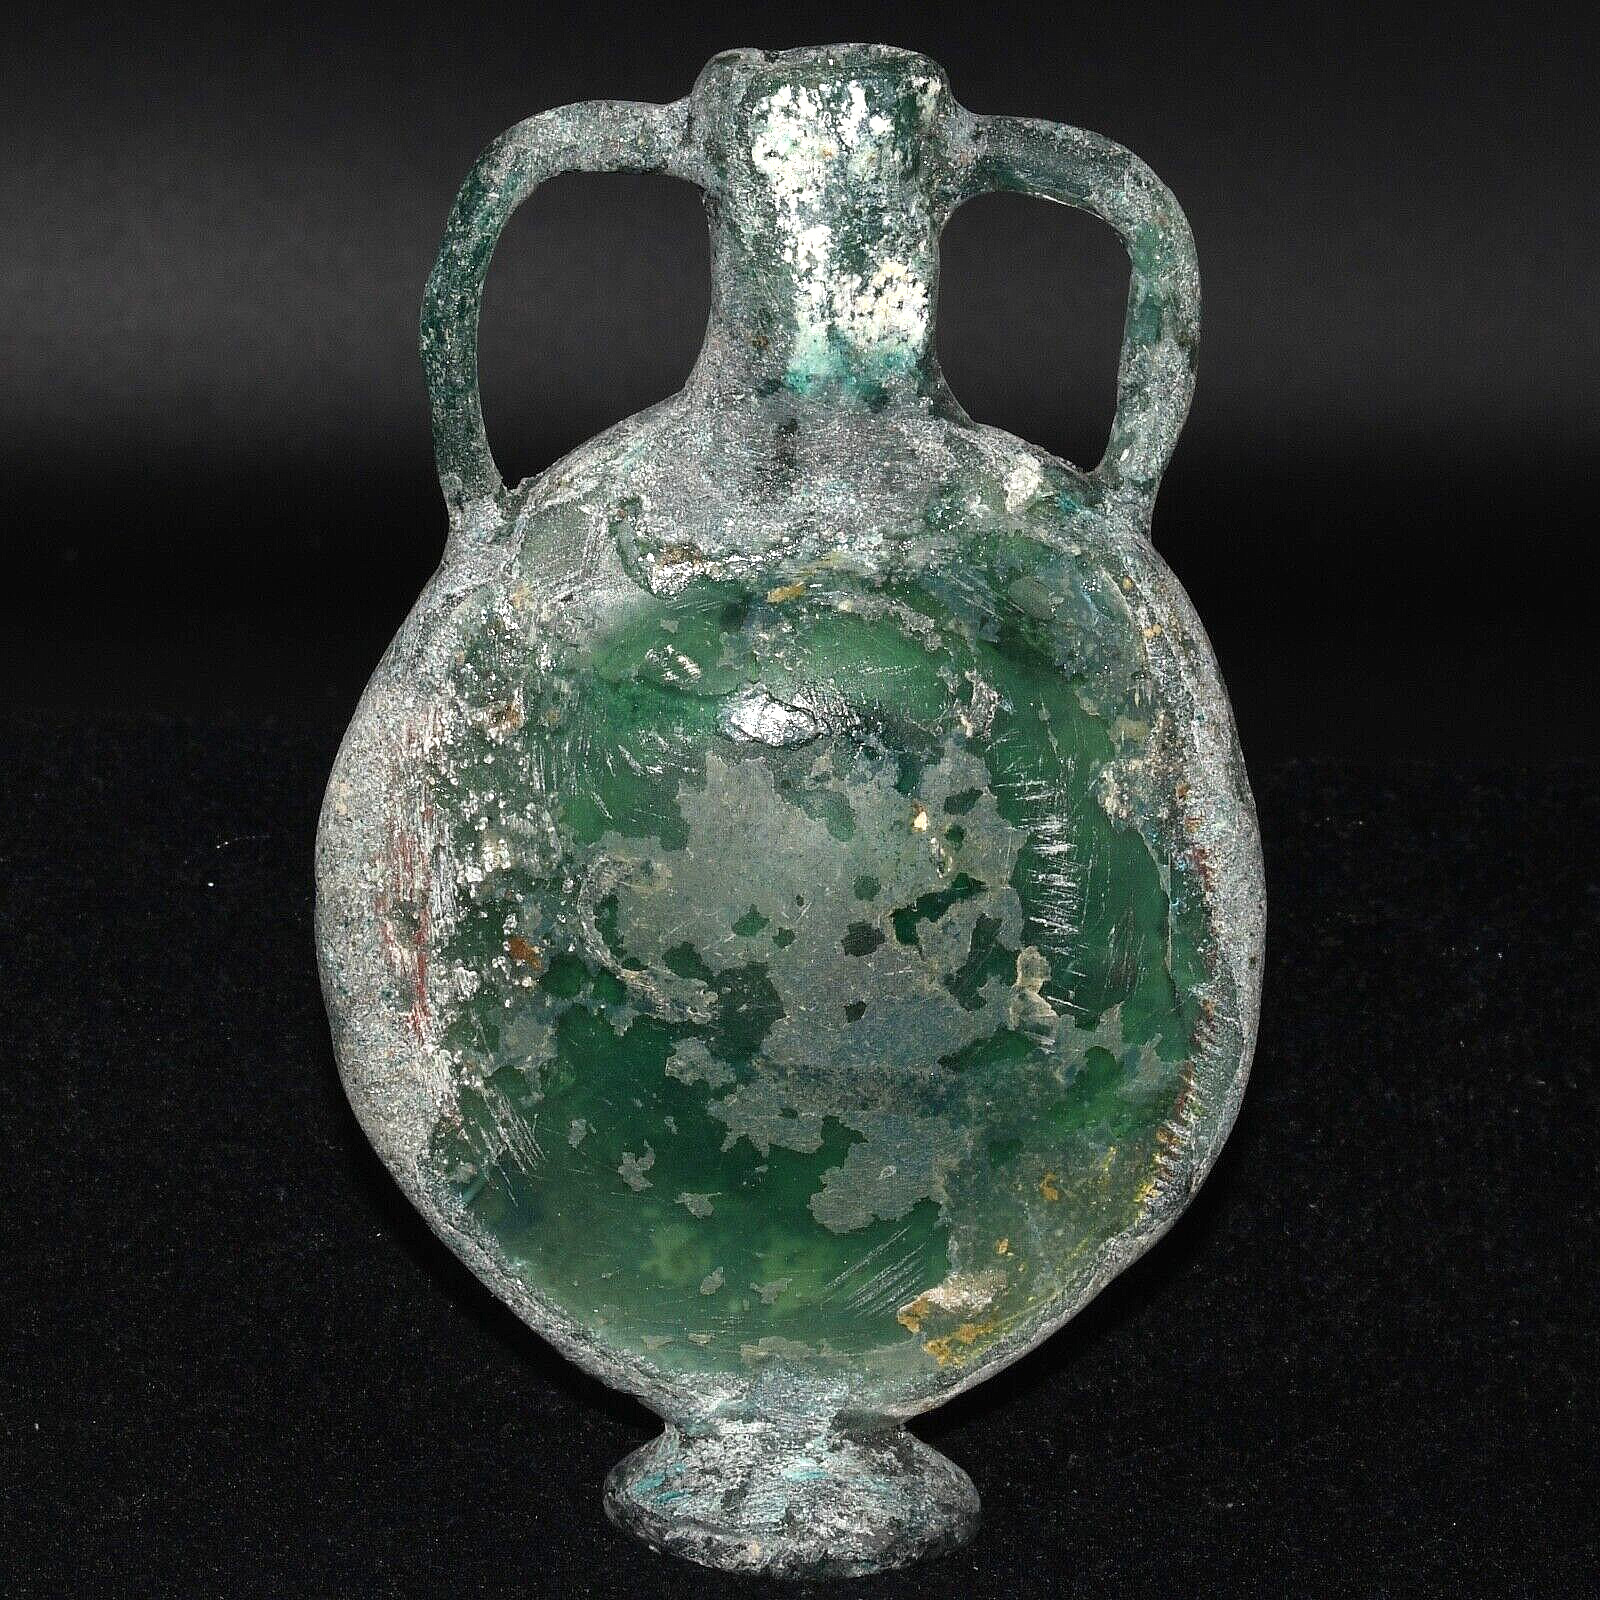 Authentic Ancient Roman Glass Vessel with Double Handle Circa 1st-2nd Century AD